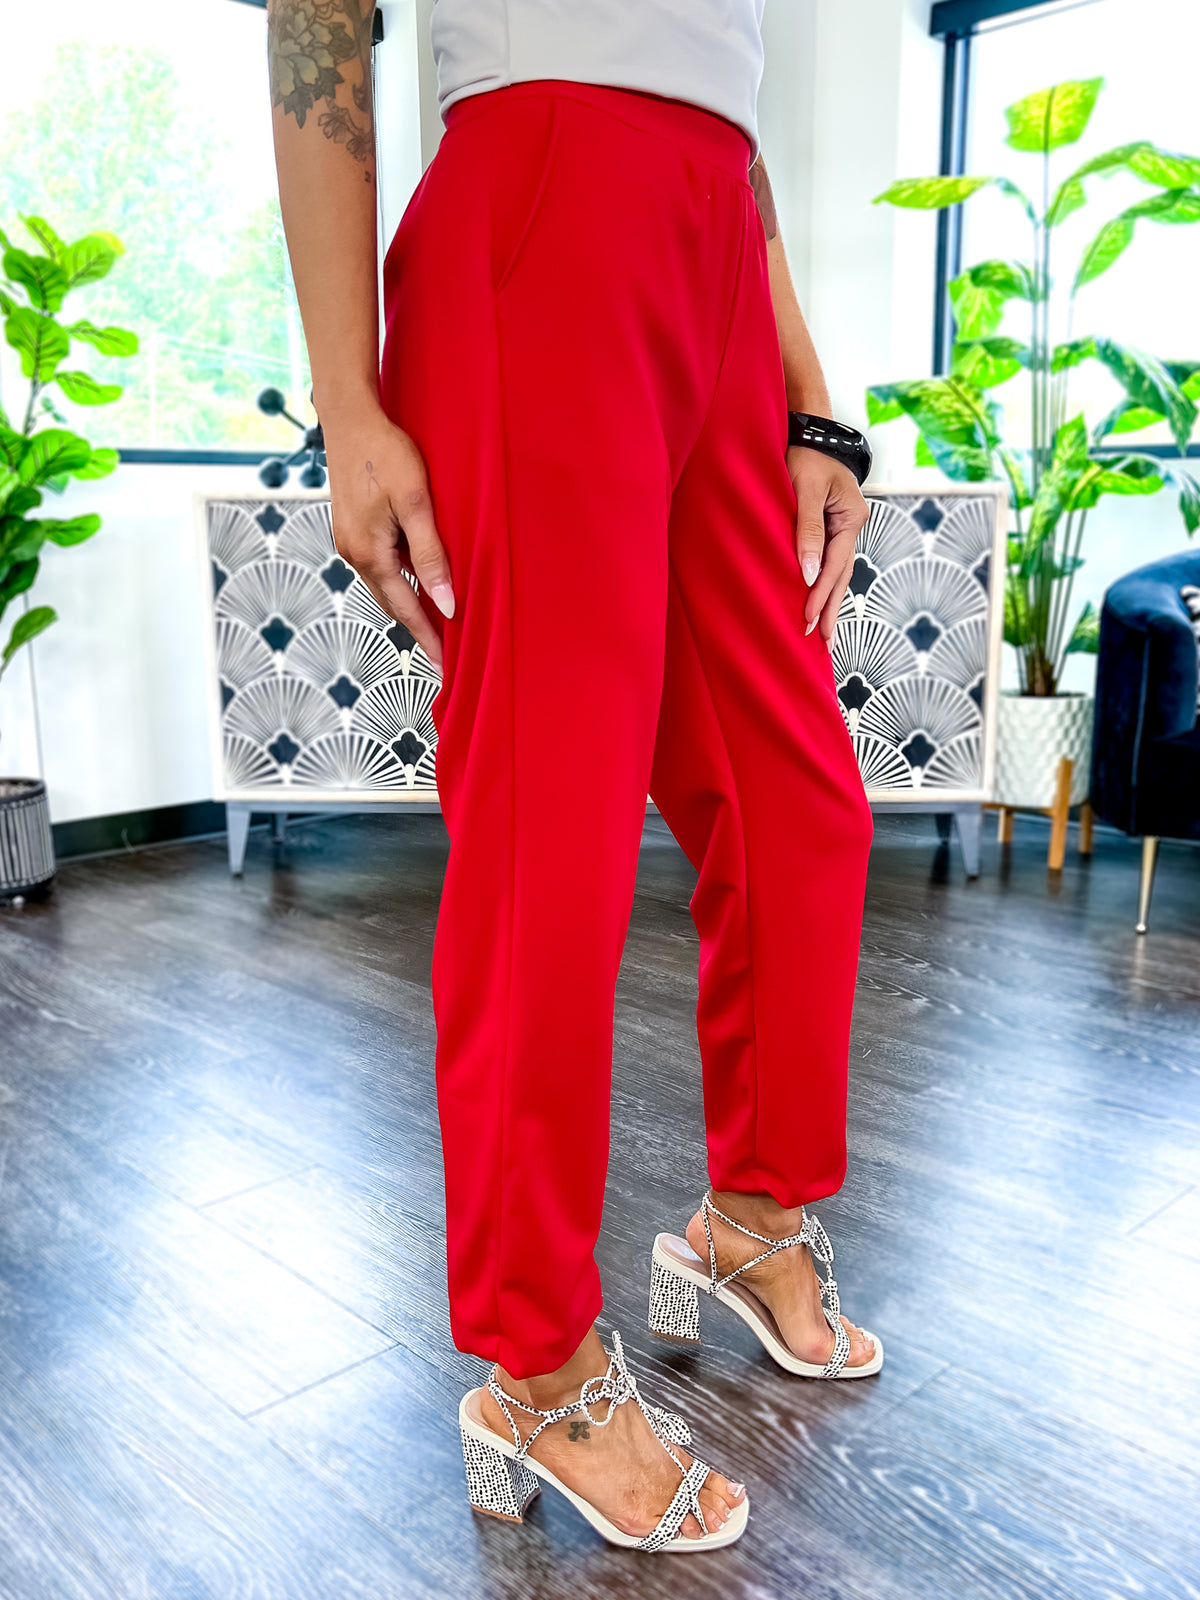 Higher Standards Pants | Red - The ZigZag Stripe